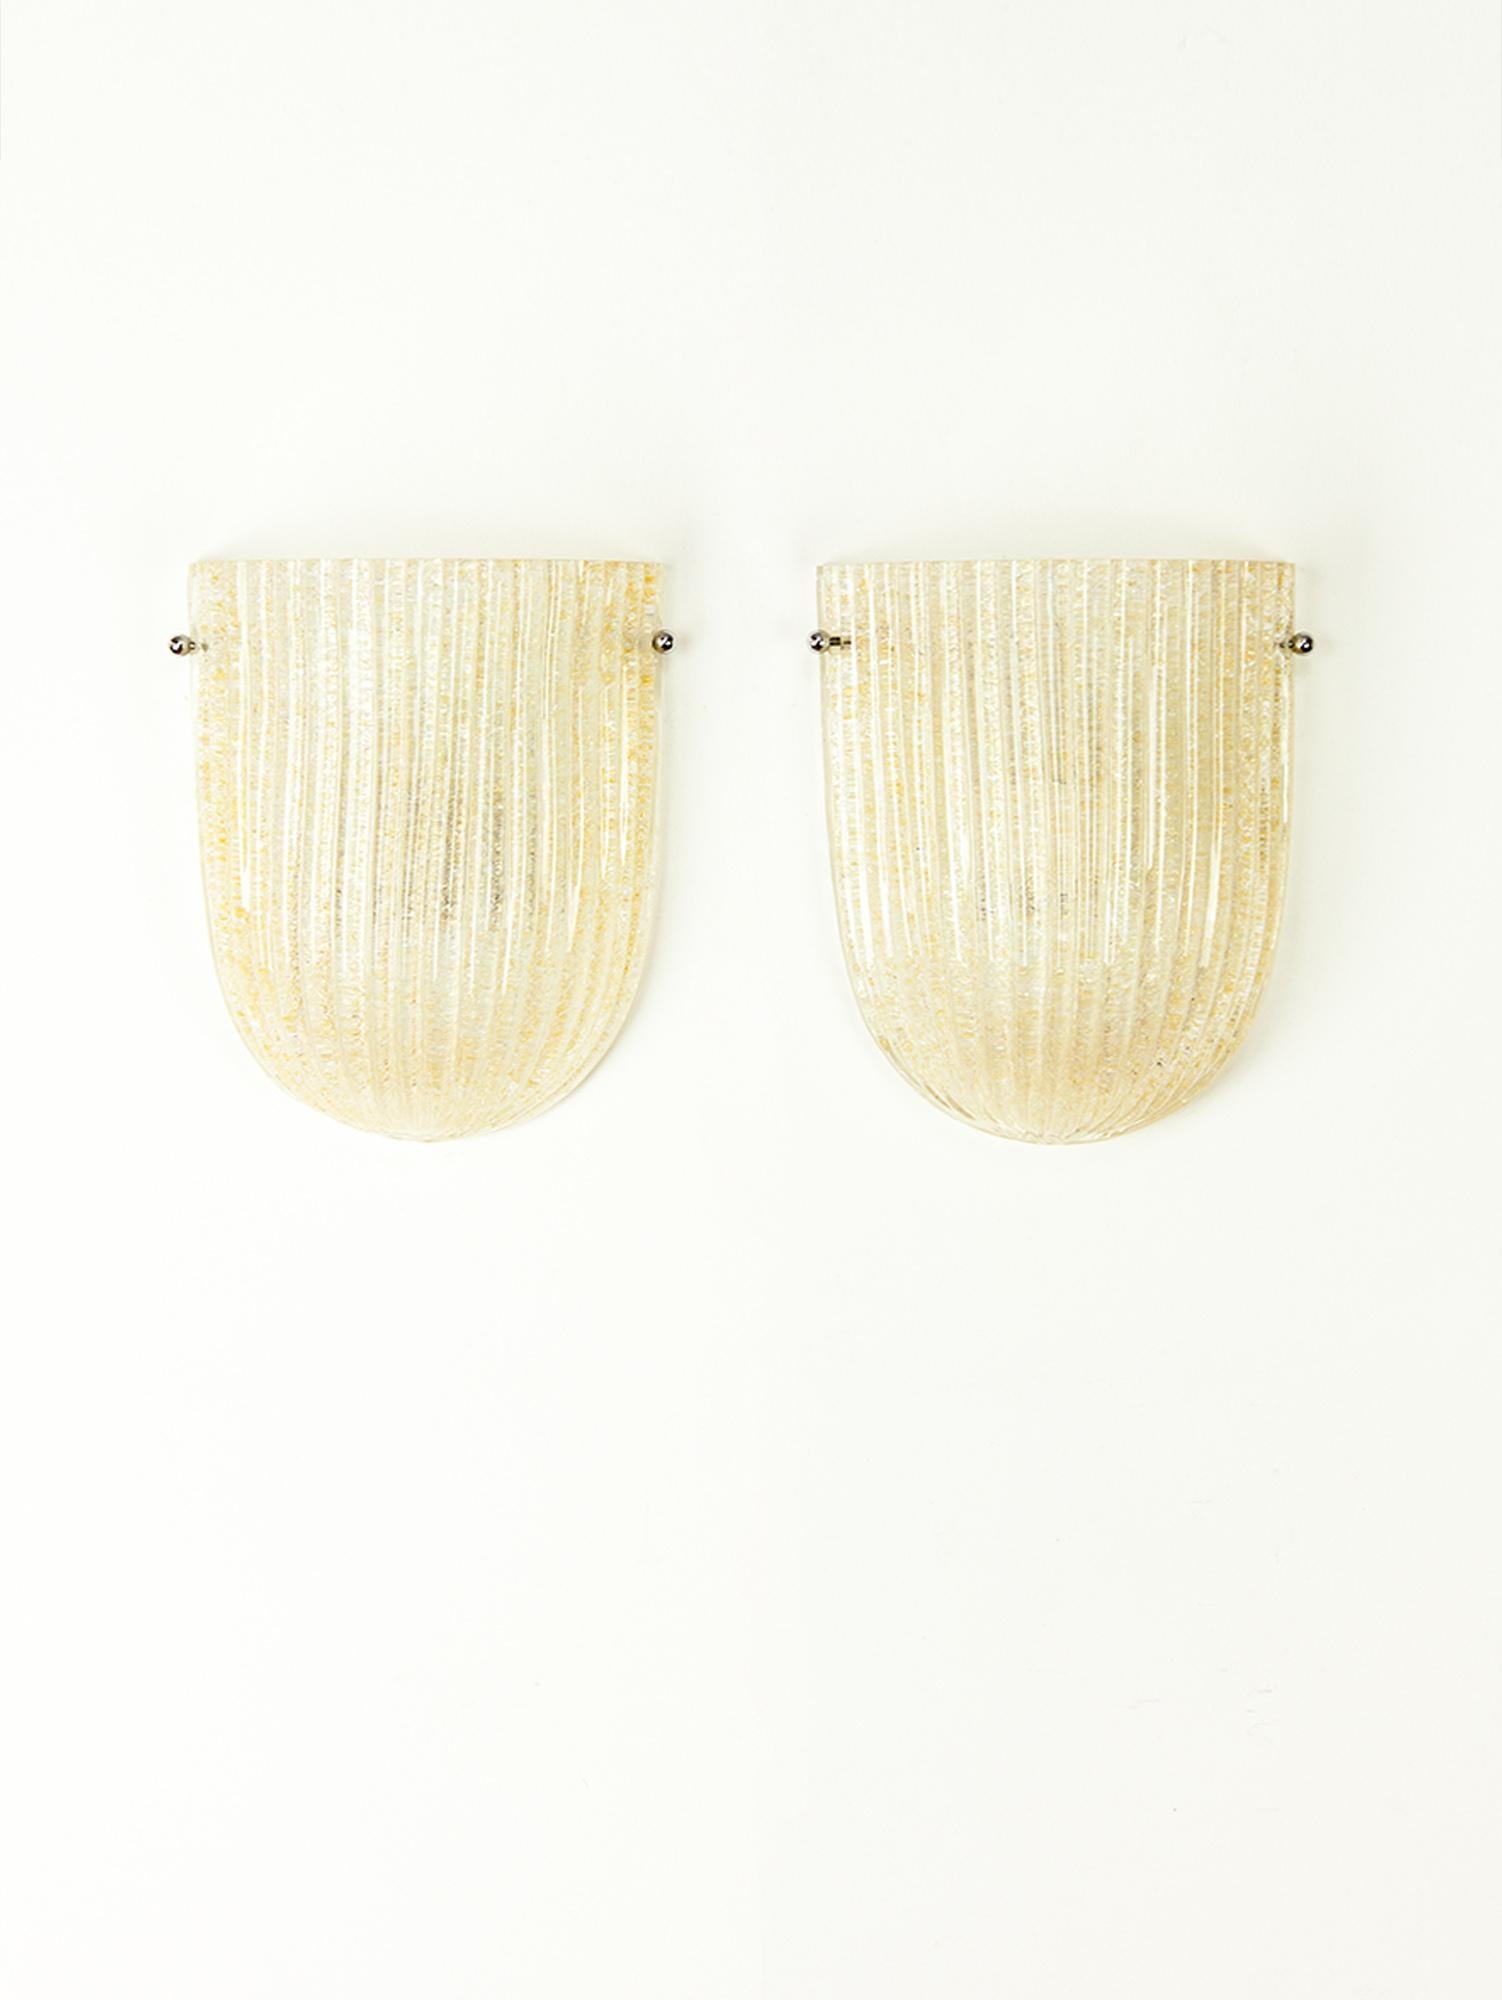 Pair of Murano Sconces by Zonca, Italy, 1970s For Sale 4